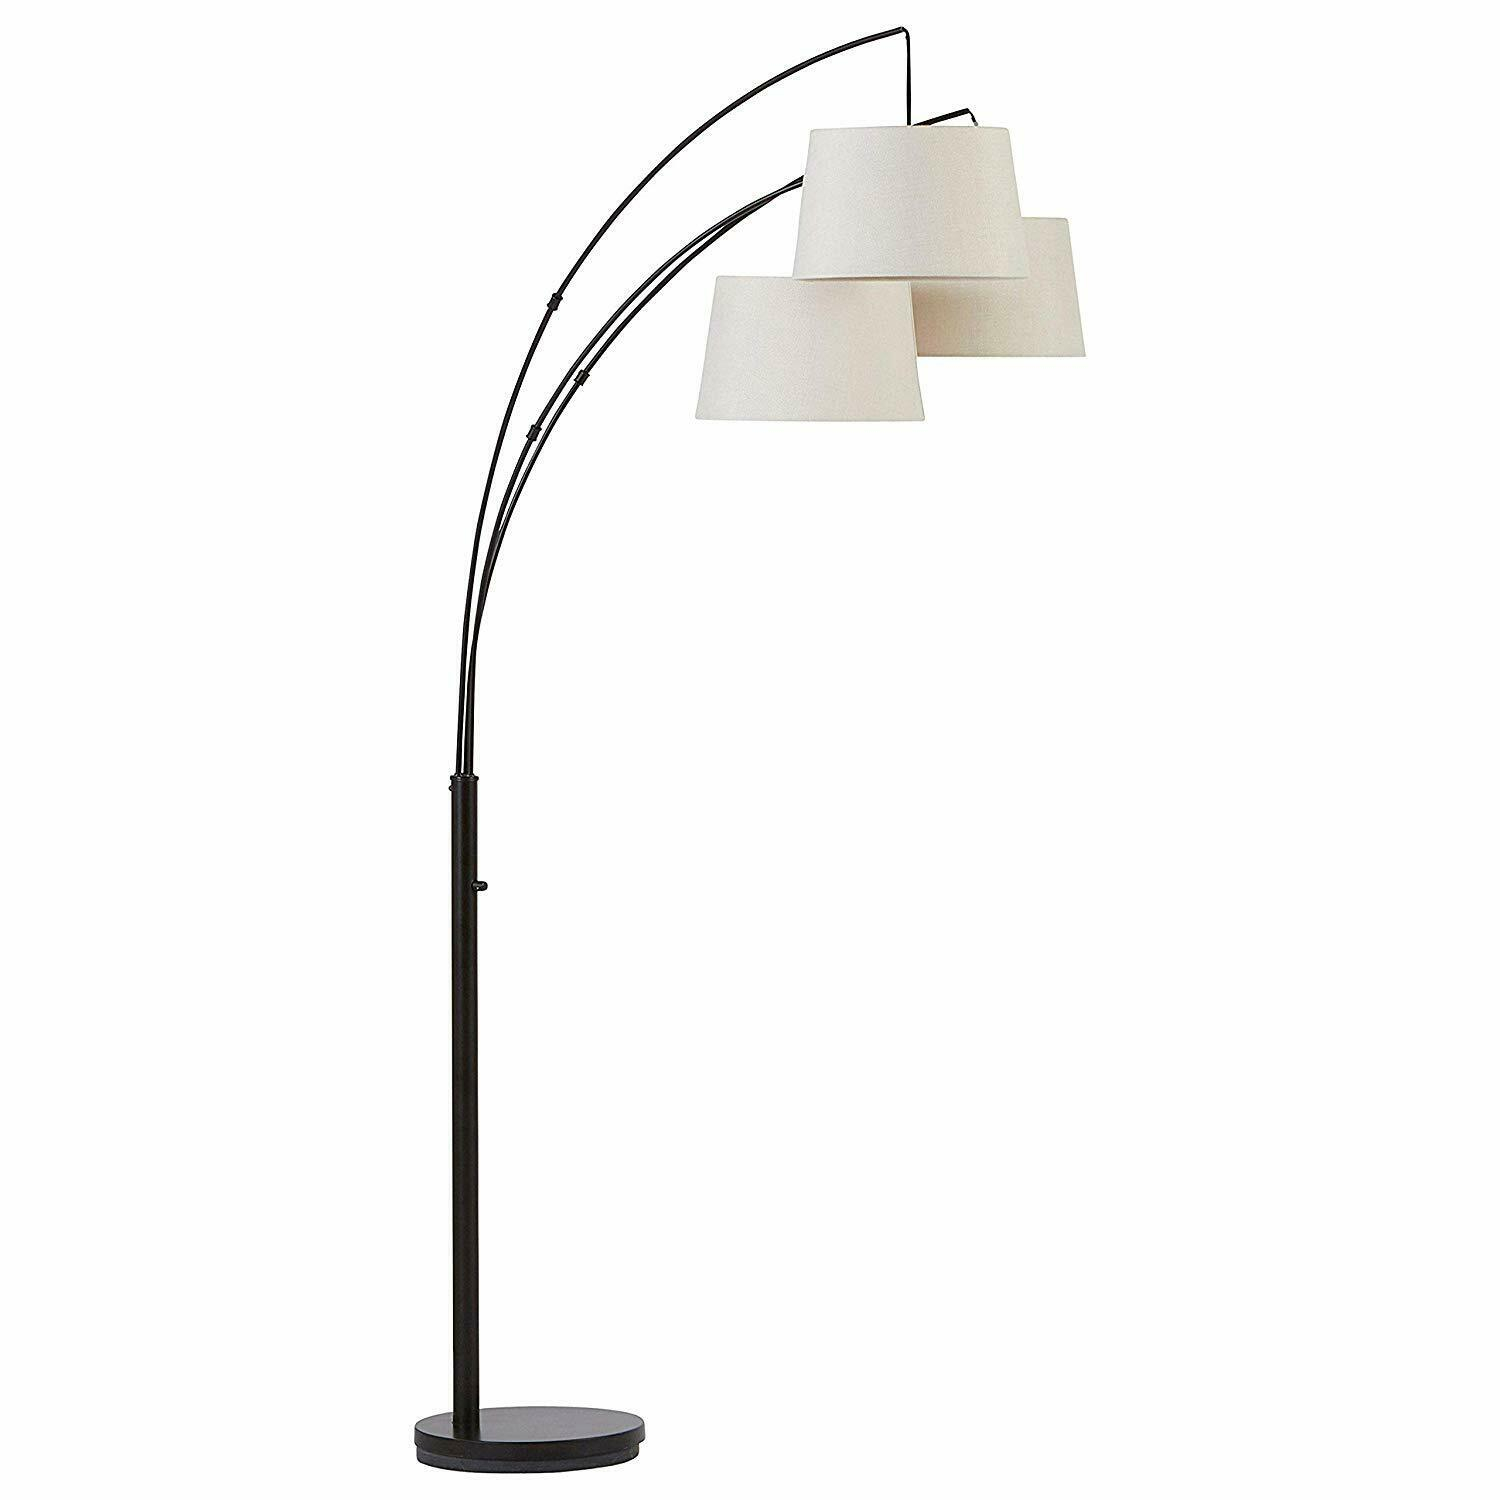 Rivet Modern Adjustable 3 Arm Floor Lamp 77h With Bulbs And Burlap Shades in size 1500 X 1500